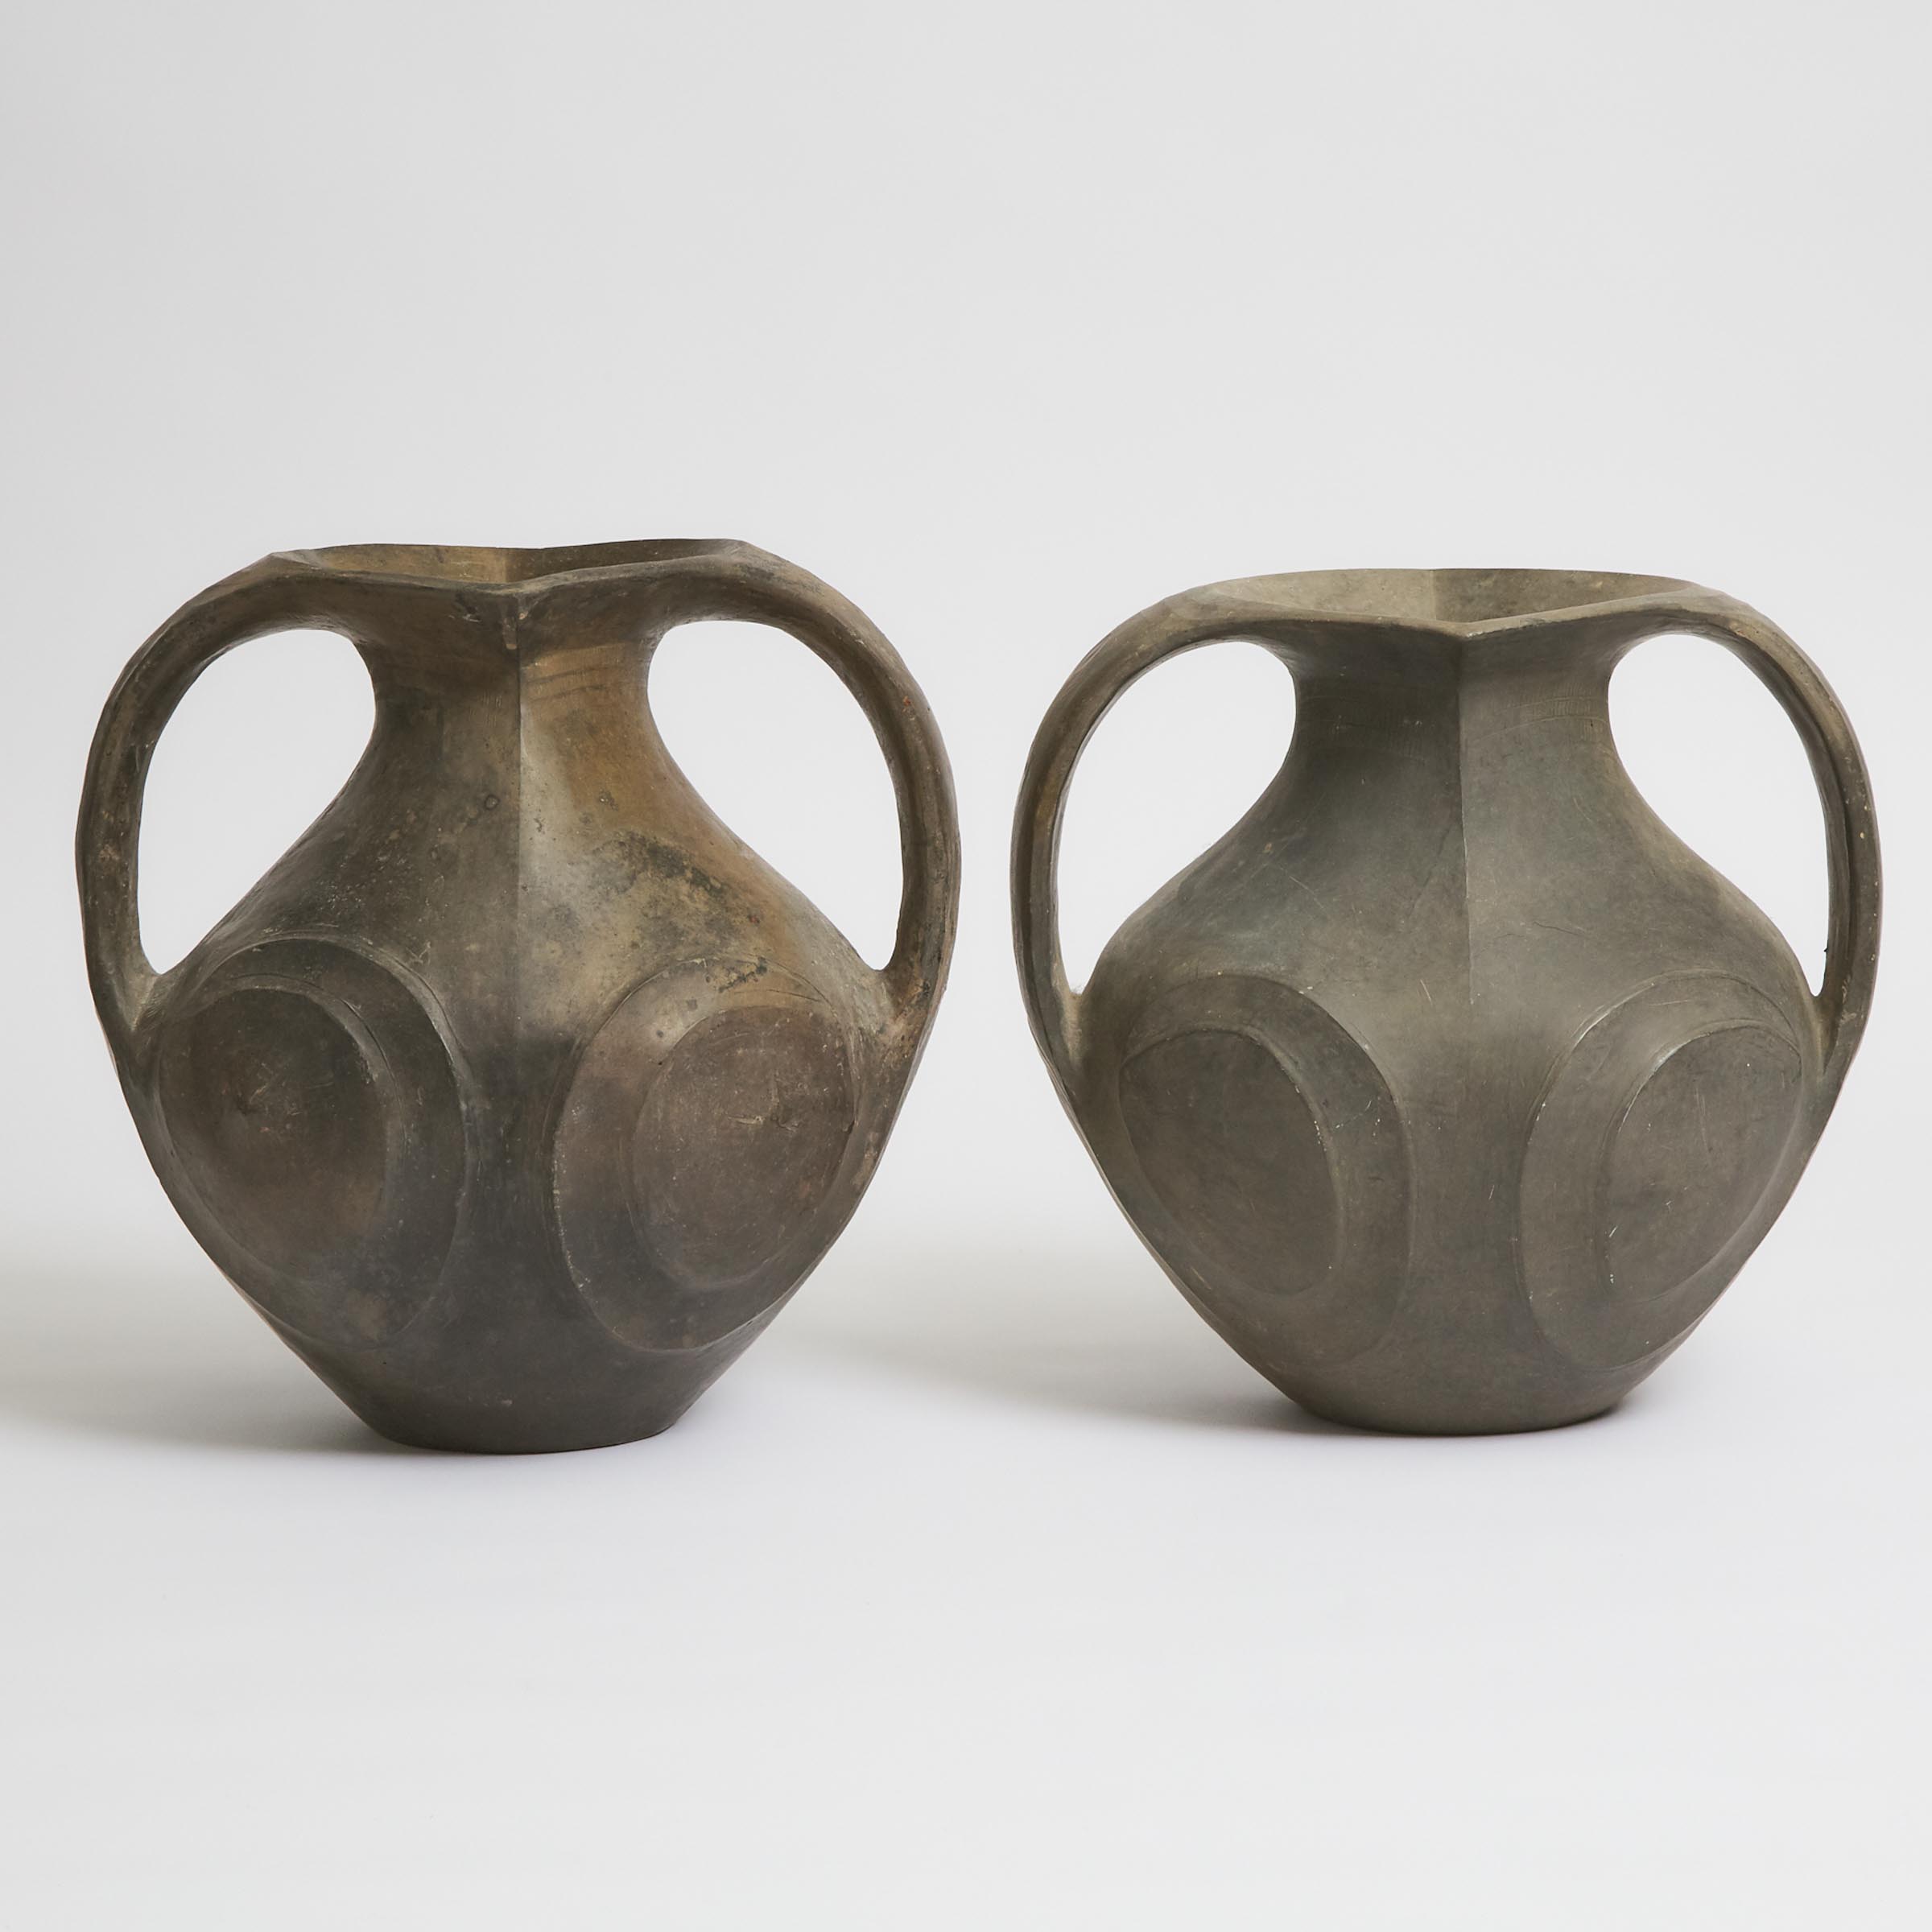 A Pair of Large Black Pottery Amphorae, Han Dynasty (206 BC-220 AD)